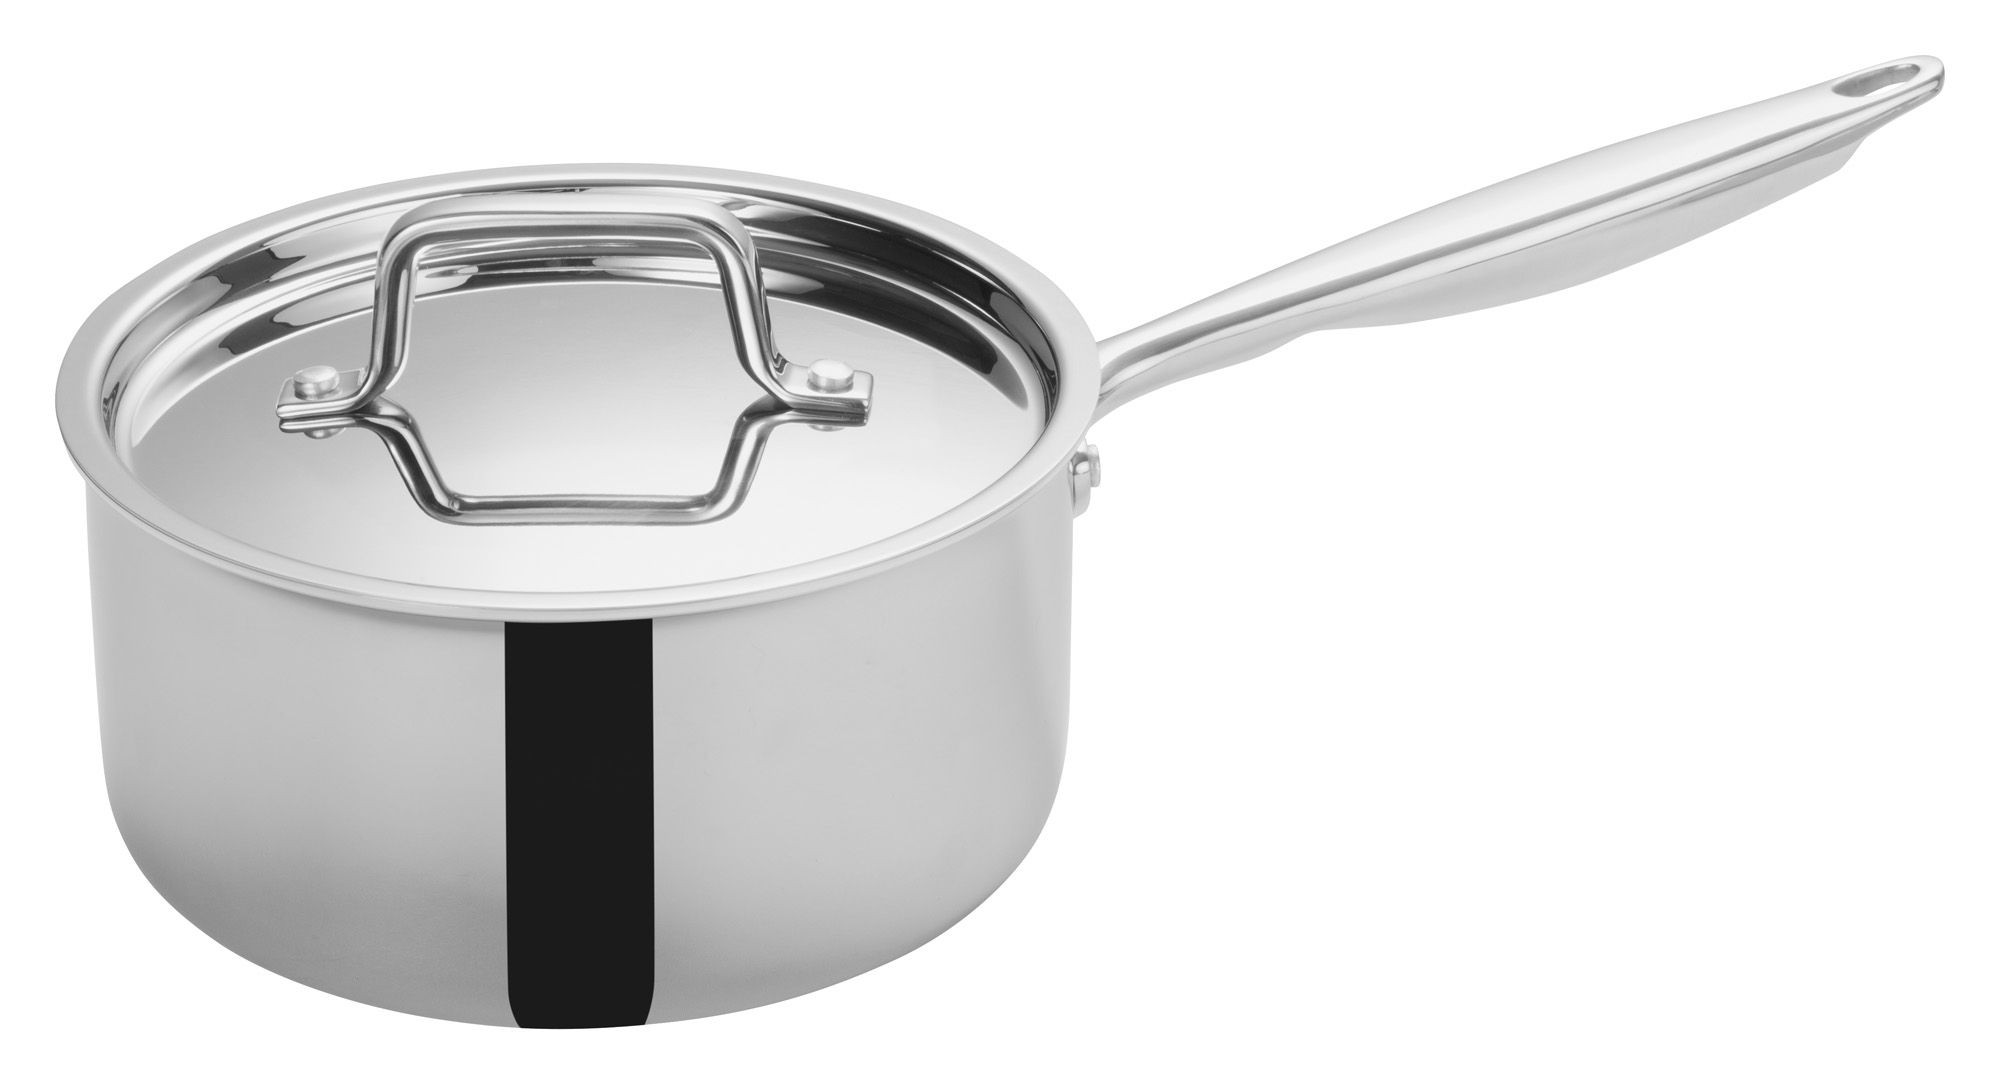 https://www.lionsdeal.com/itempics/Winco-TGAP-4-Tri-Ply-Stainless-Steel-3-5-Qt--Sauce-Pan-with-Cover-38427_xlarge.jpg